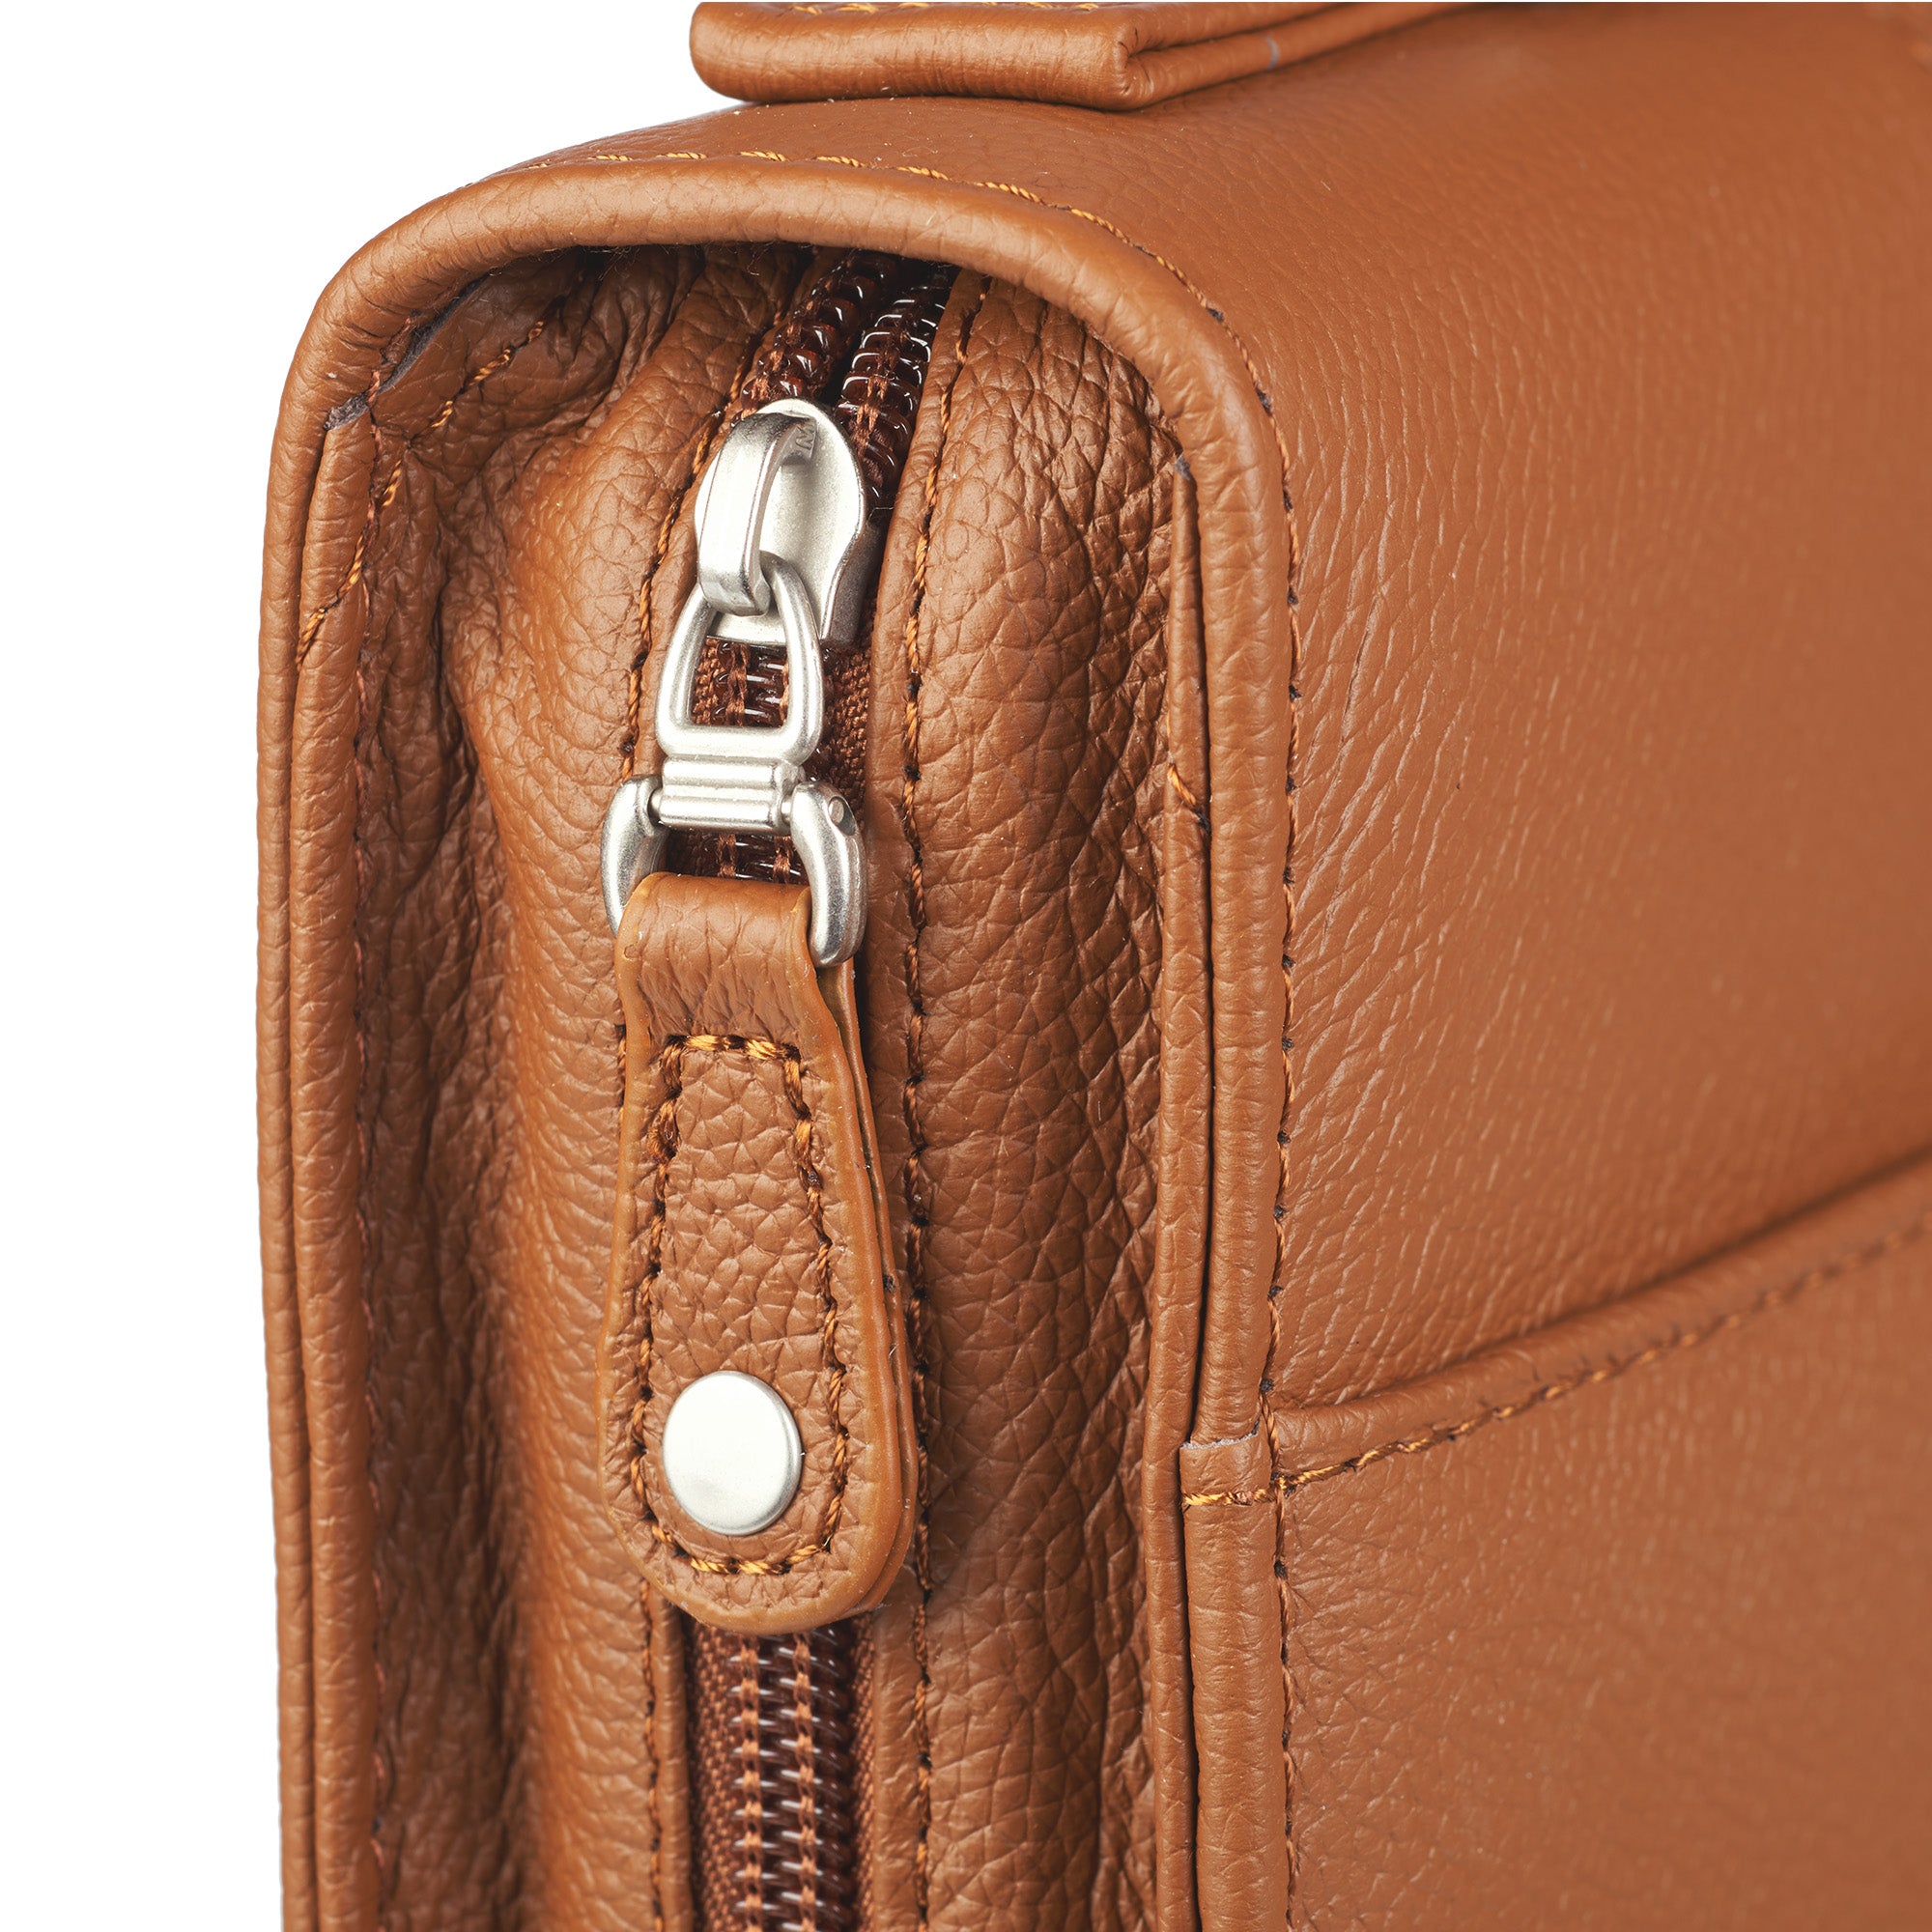 Image of Faith Full Grain Leather Bible Cover in Saddle Tan other